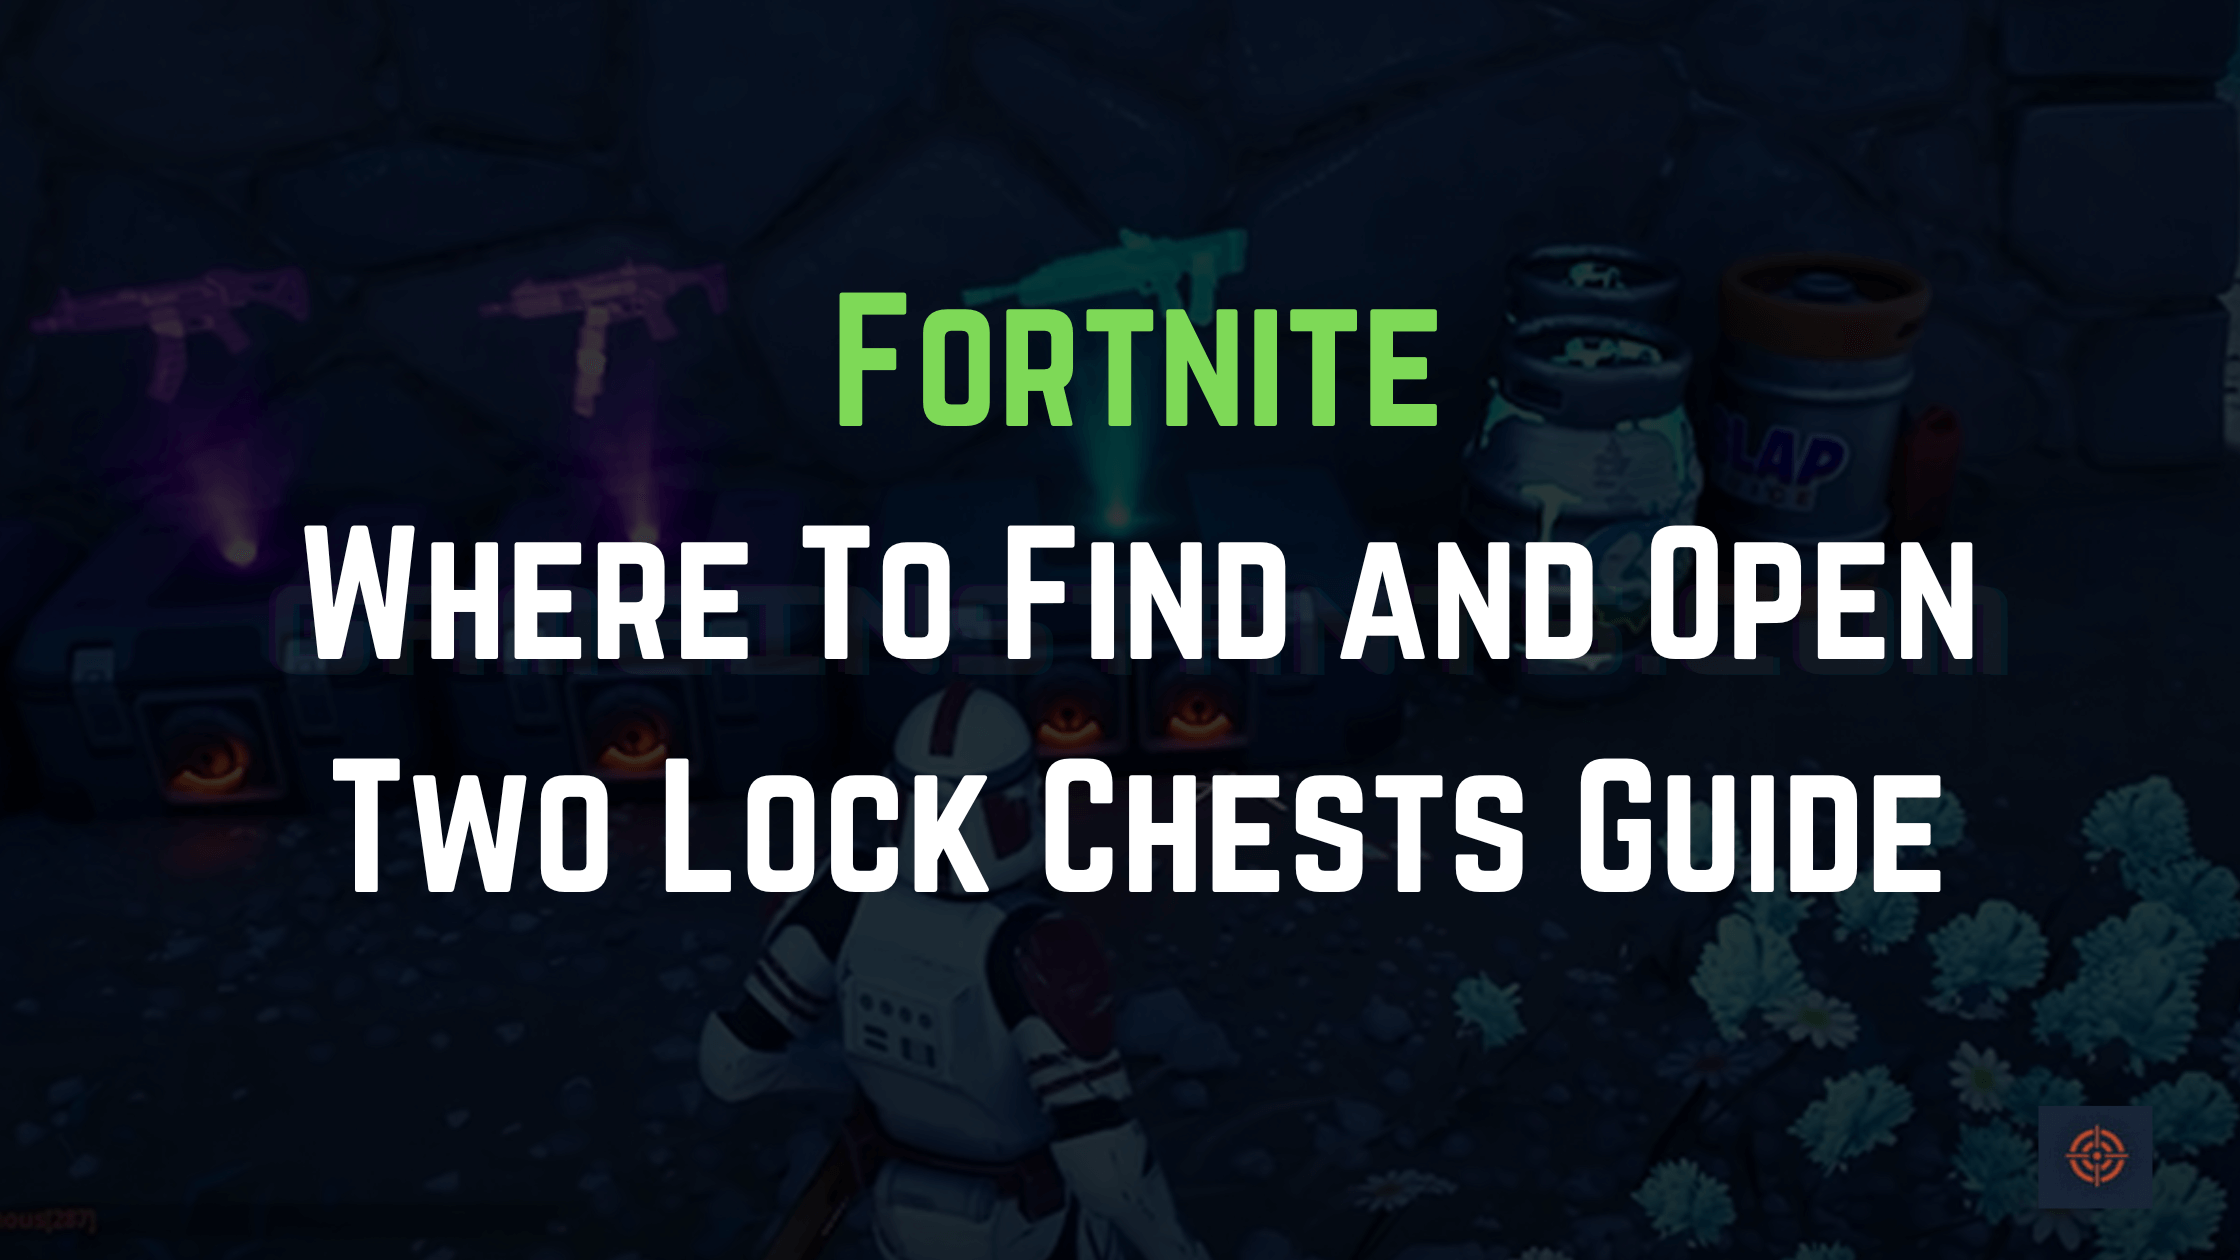 Two Lock Chests in Fortnite